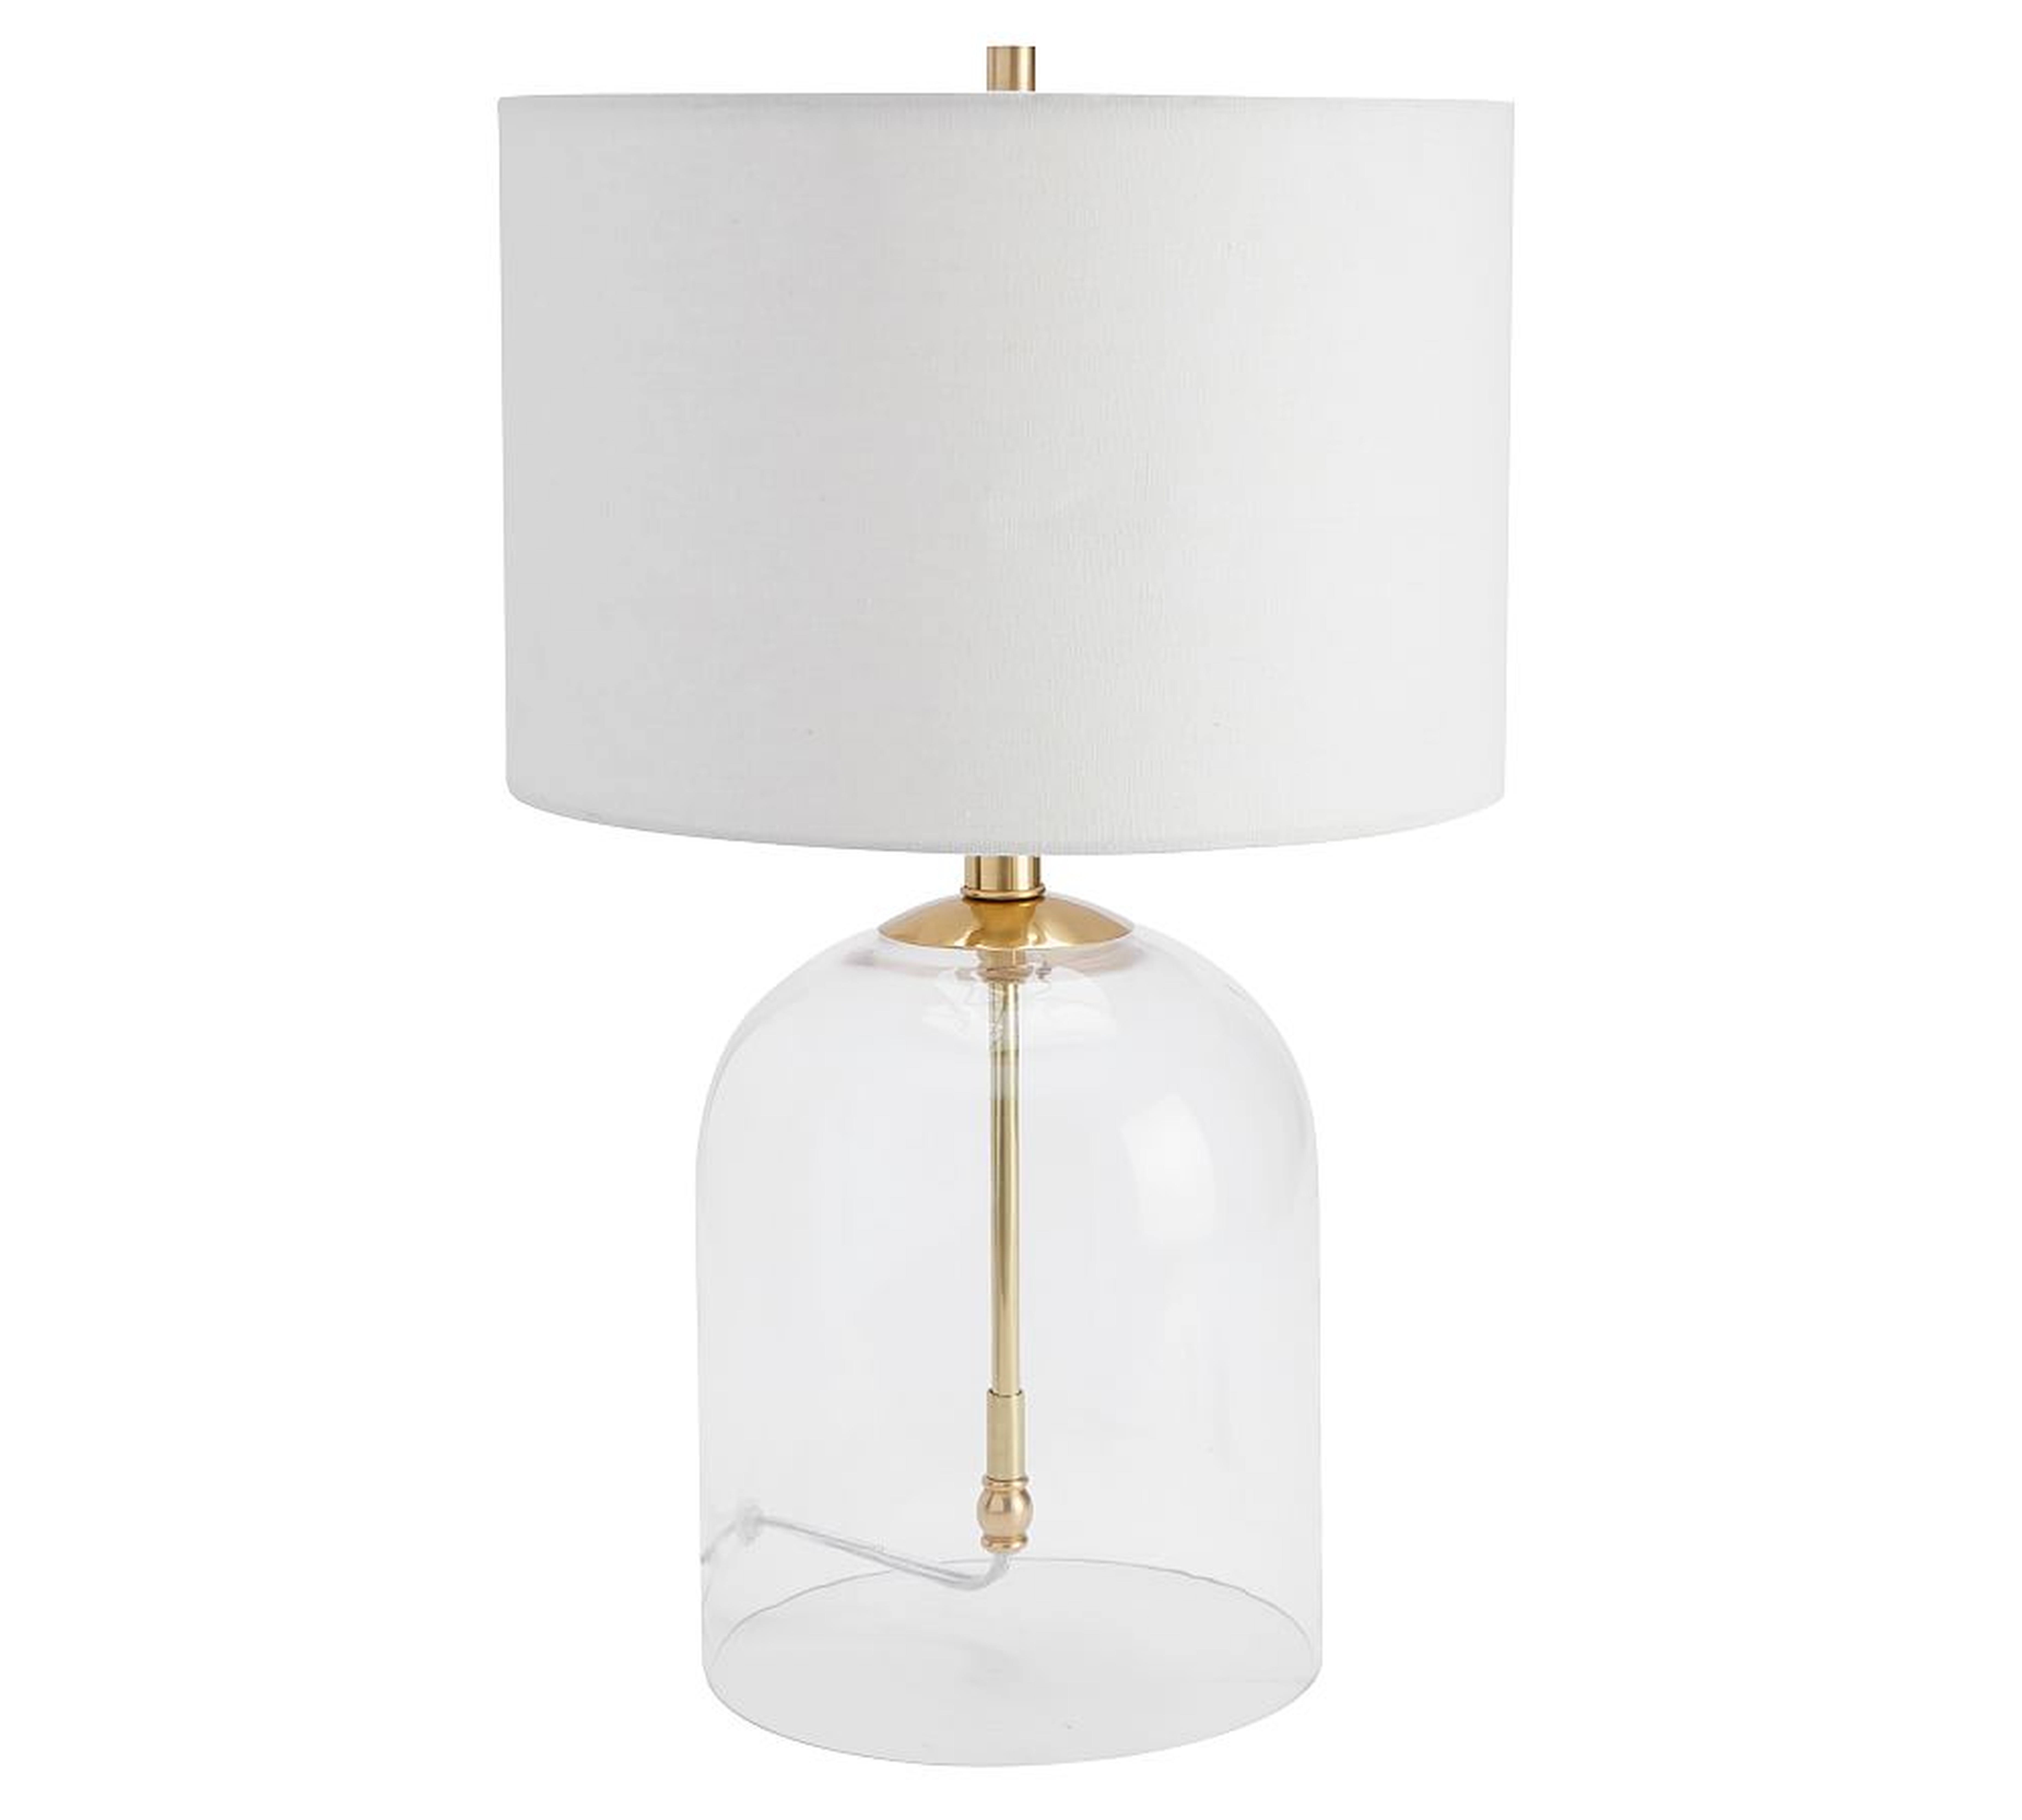 Aria Dome Table Lamp with Small Straight Sided Gallery Shade, Brass - Pottery Barn